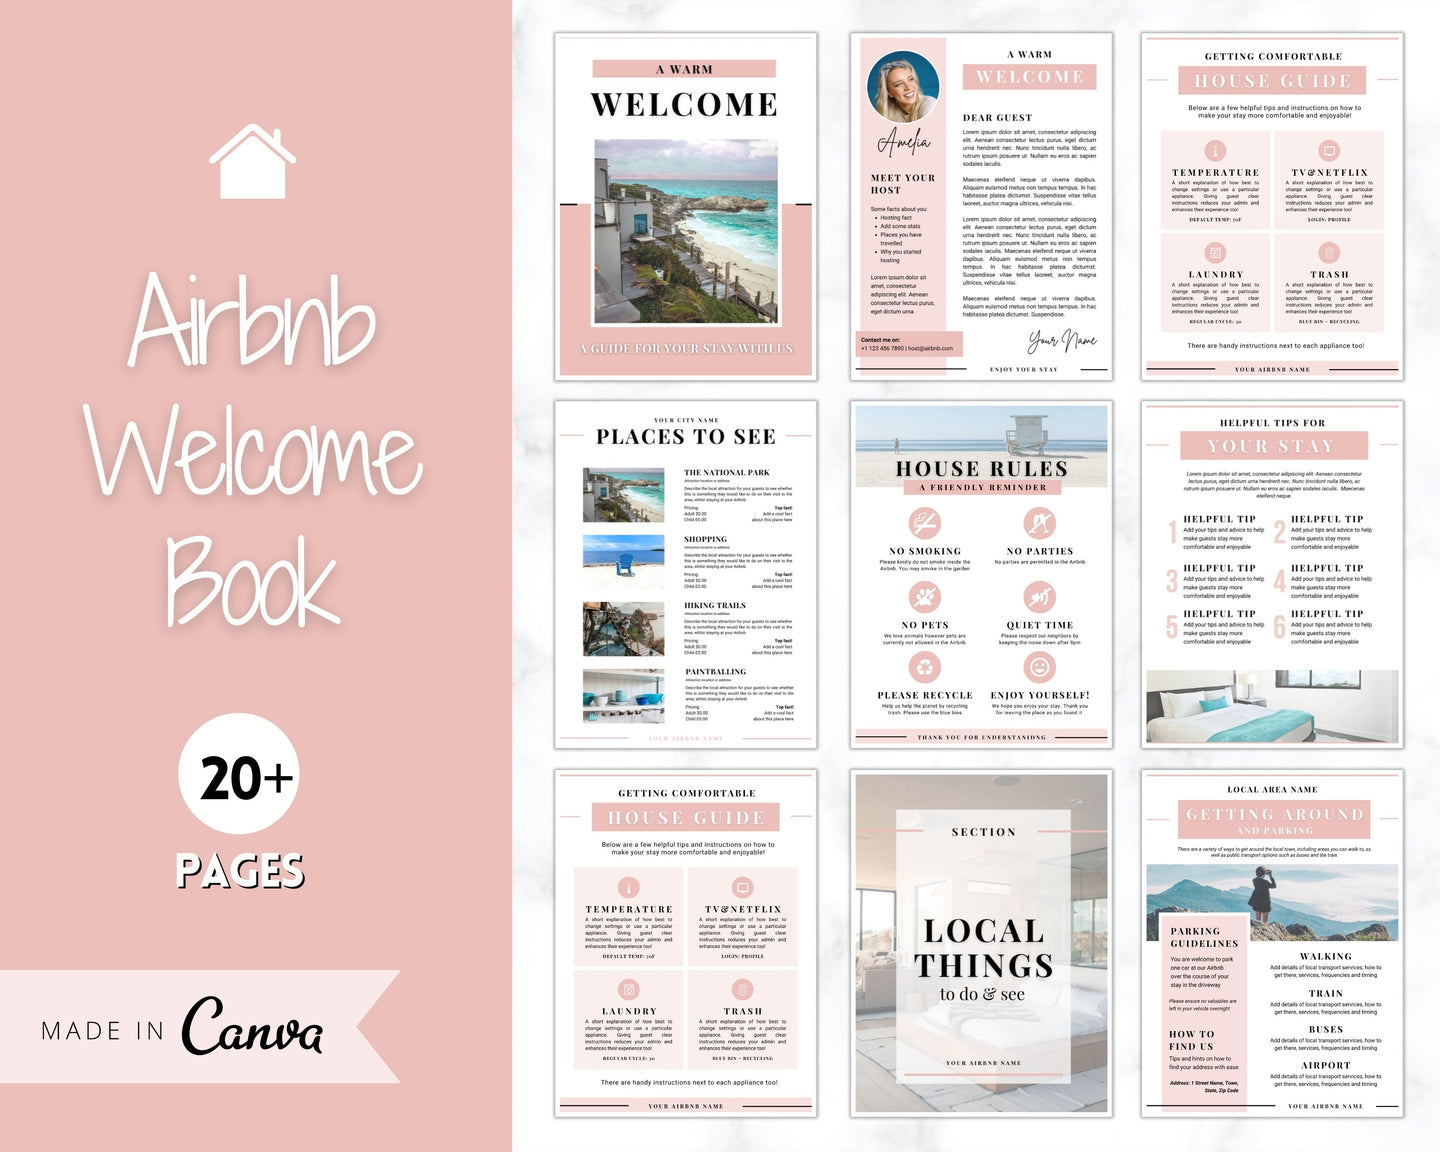 Welcome Book Template, Airbnb Welcome Guide, Editable Canva Air bnb House manual, Superhost eBook, Host signs, Signage, VRBO Vacation Rental | Pink